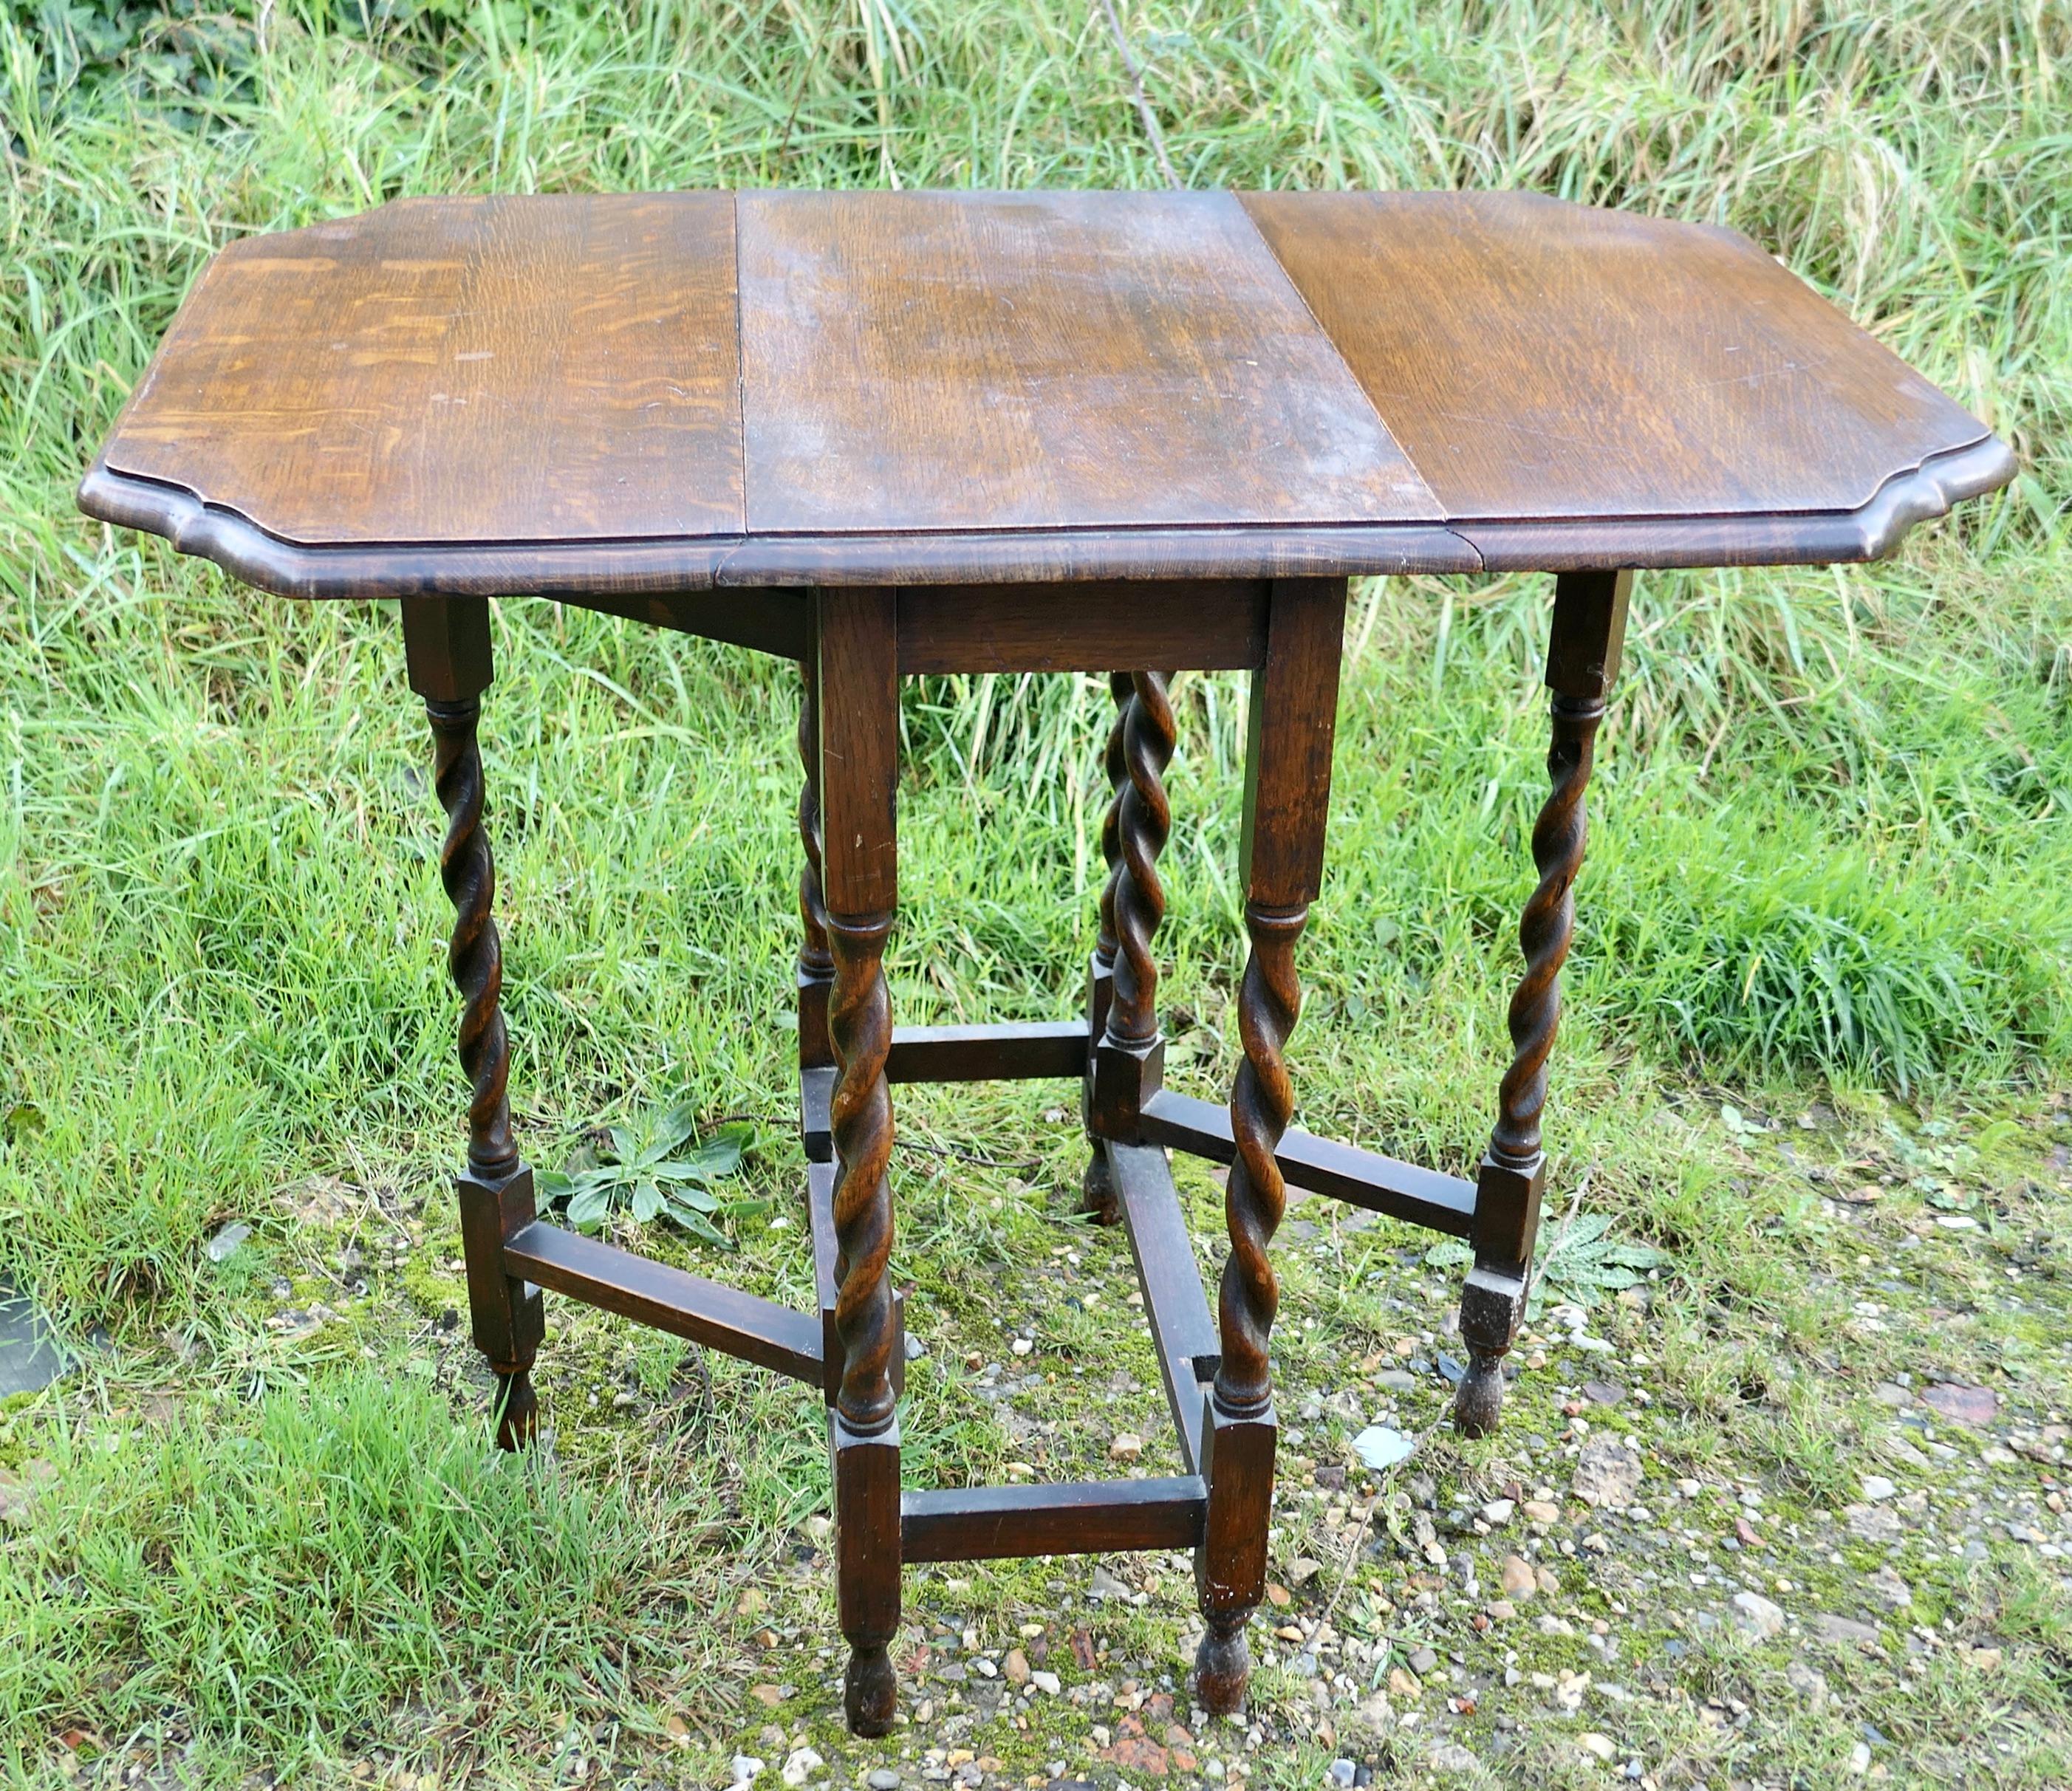 Early 20th Century A Good Solid Oak Victorian Gate Leg Table   The table is made from solid Oak   For Sale